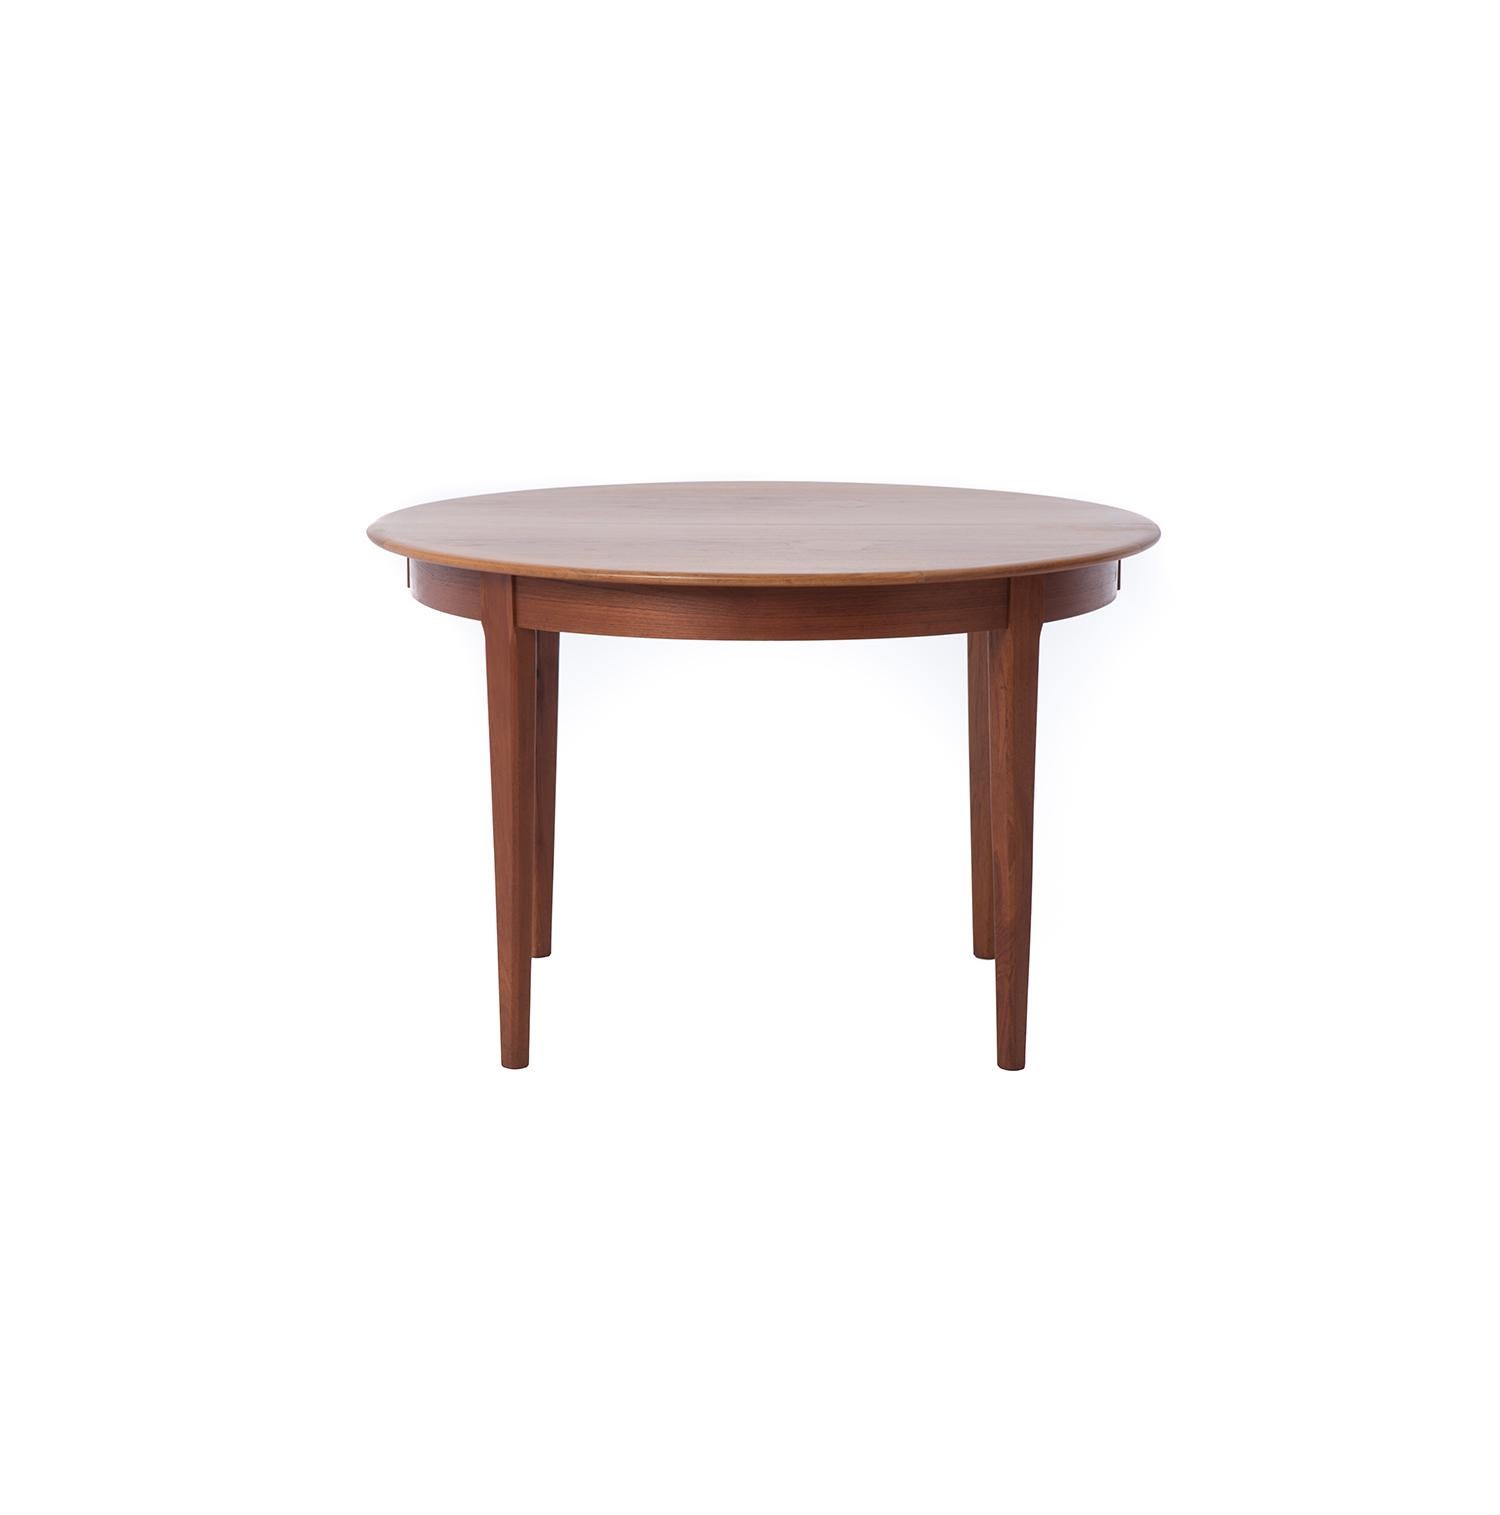 This Danish modern teak table has a lovely gem cut edge band detail. This table is an original midcentury table that would make a great breakfast table or dining table for a cozy spot. Made from old growth teak and hand finished with oil.